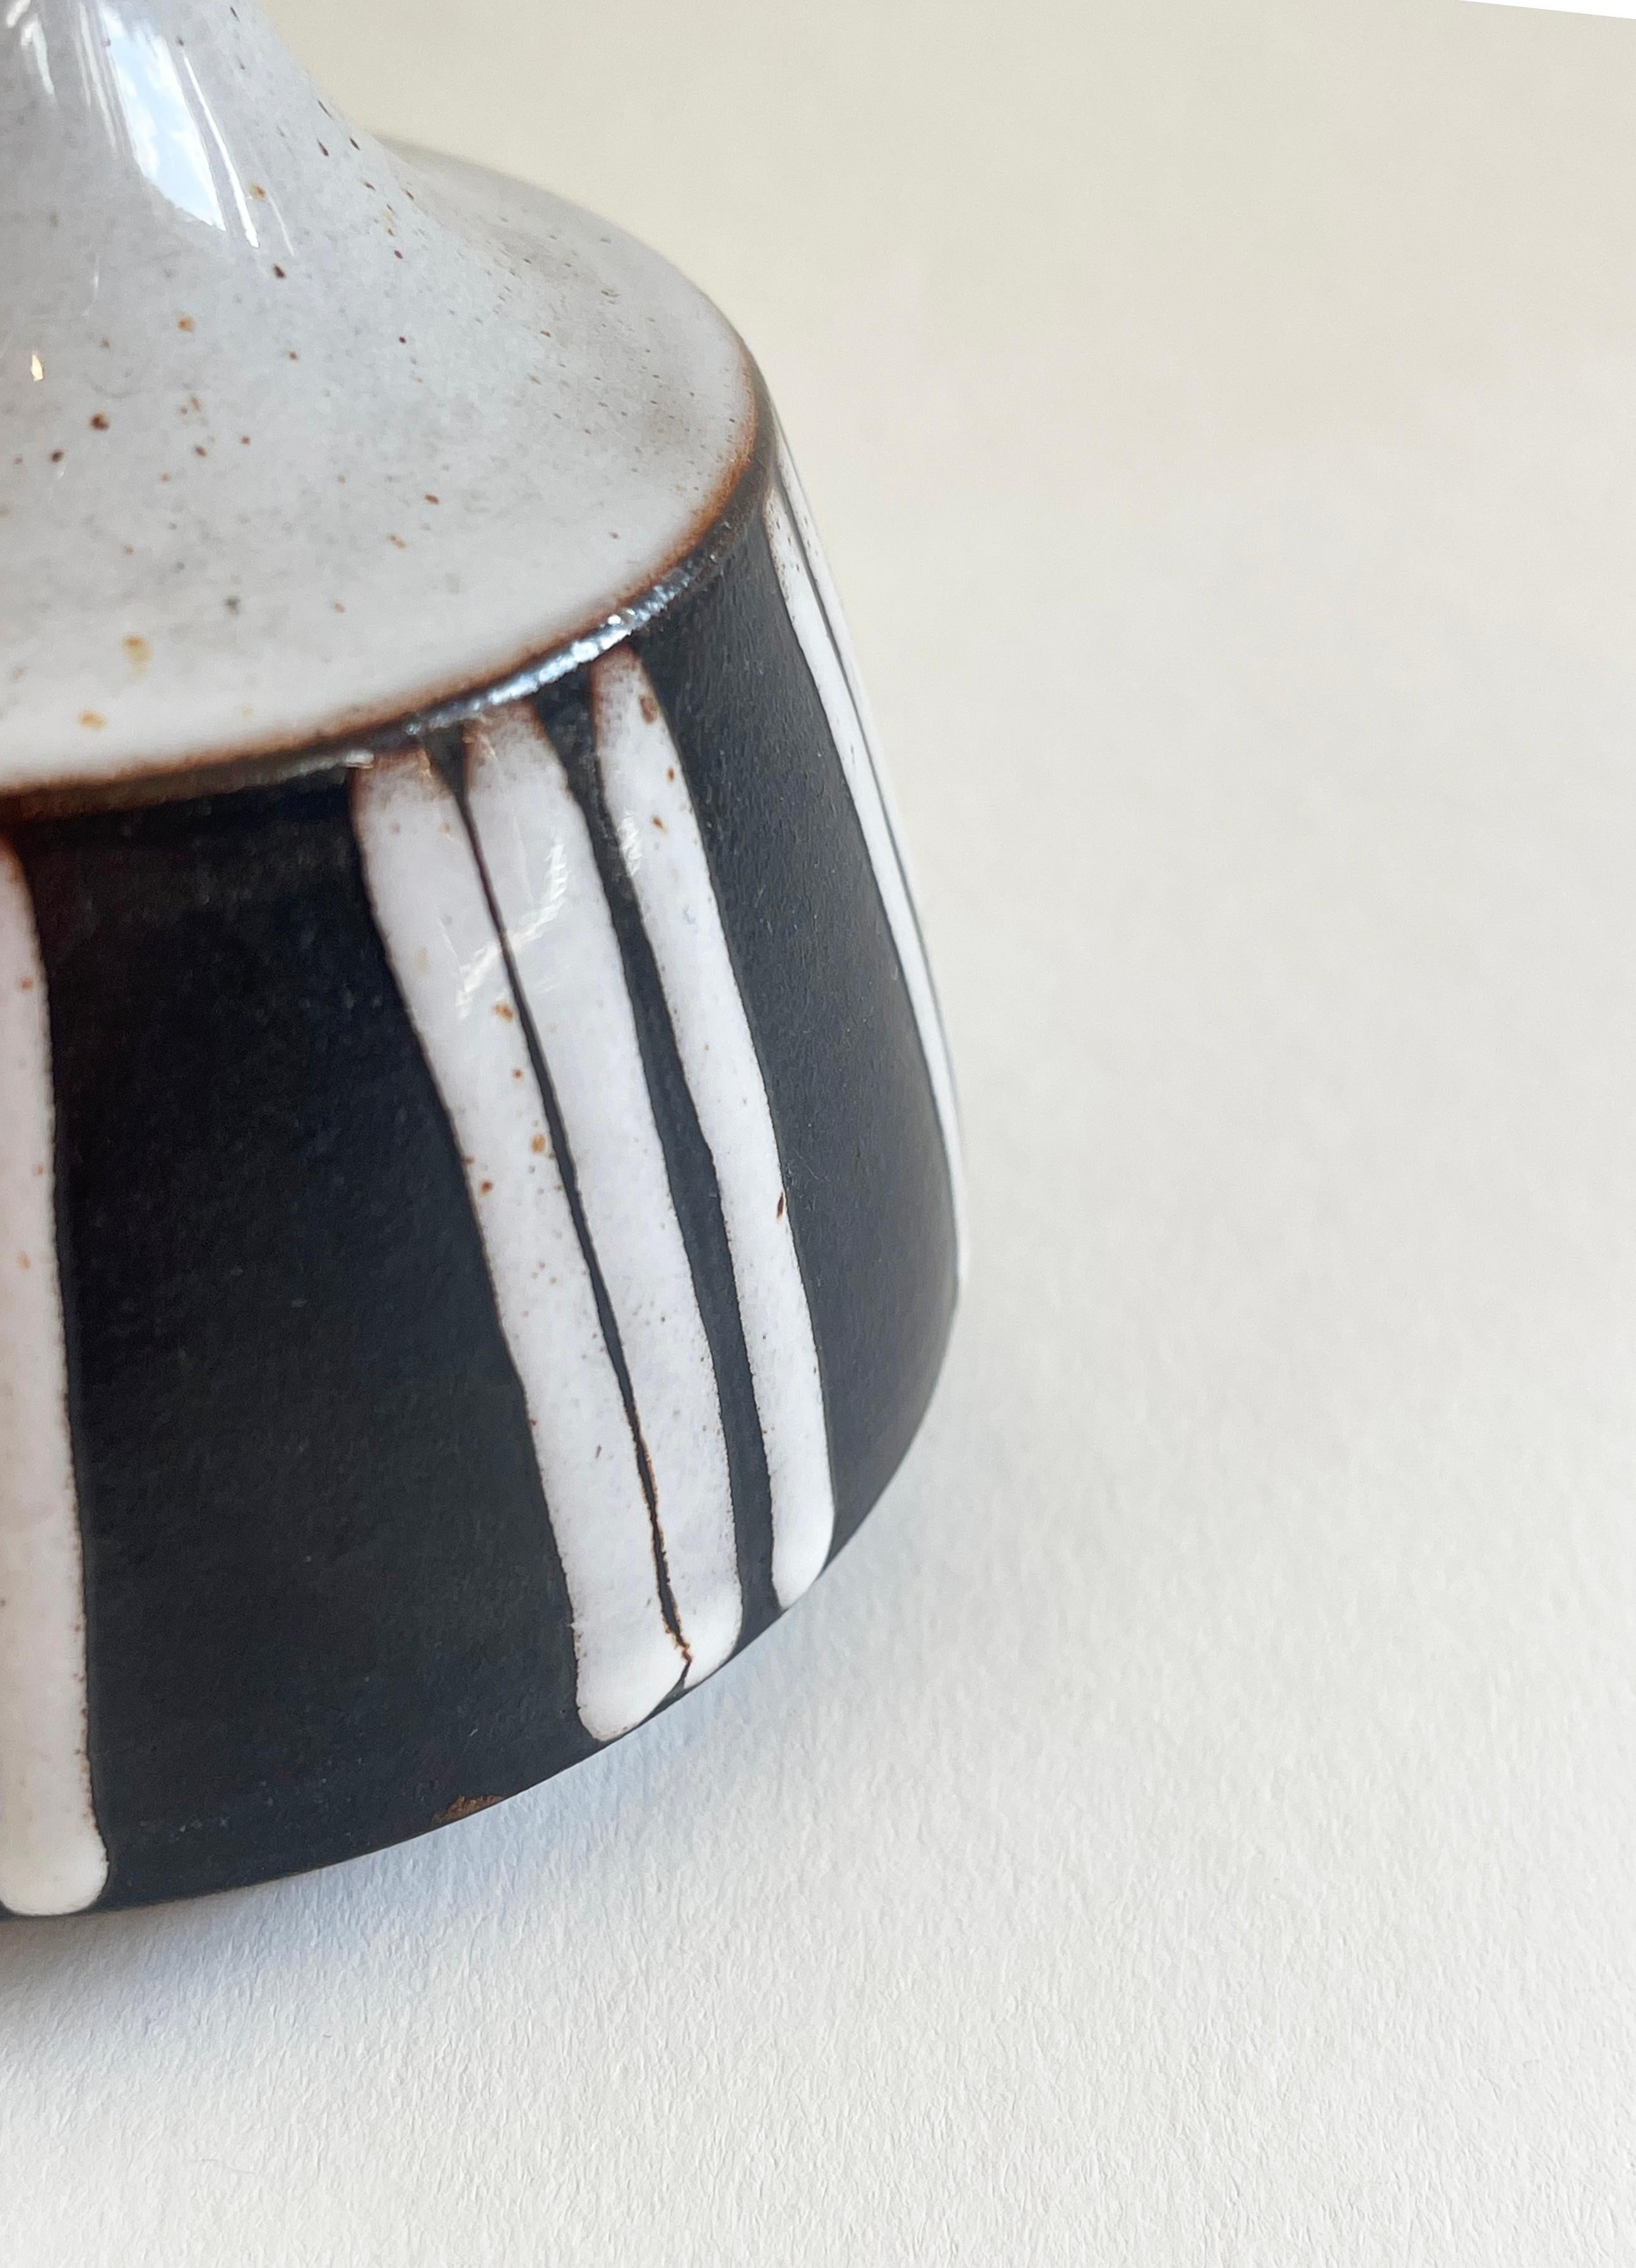 A beautiful ethnic vibe emanates from this small German studio ceramic vase.
Made around 1970, this vase is one-of-a-kind made and signed by BS Goslar.
The beige areas including the stripes are glossy and lightly ''sprinkled''.
The dark brown areas